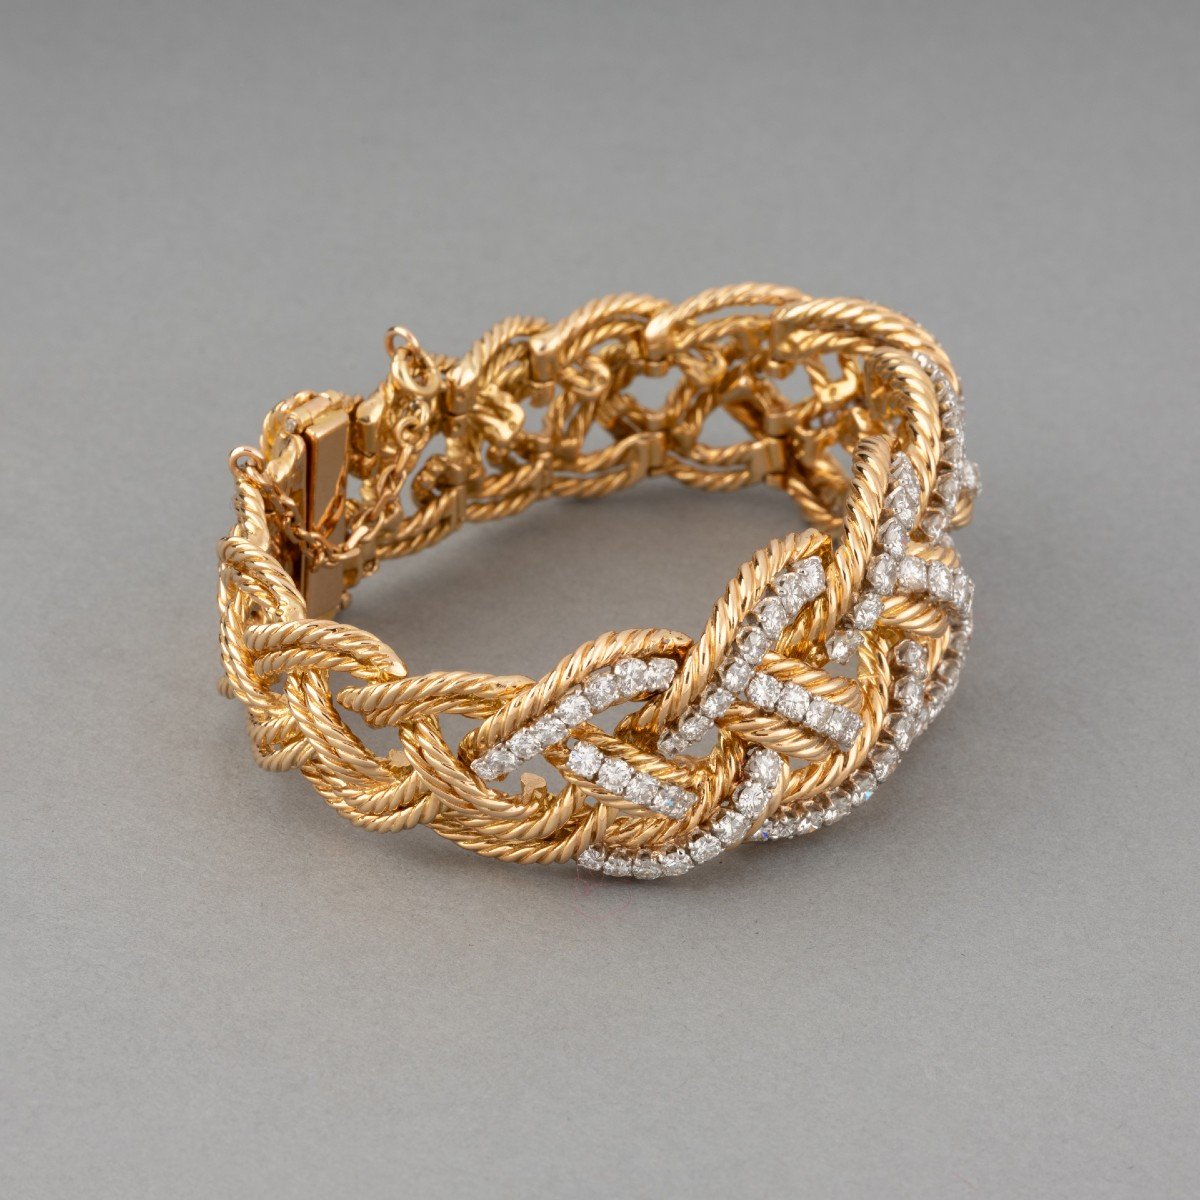 Vintage French Bracelet In Gold And 9 Carat Diamonds-photo-3